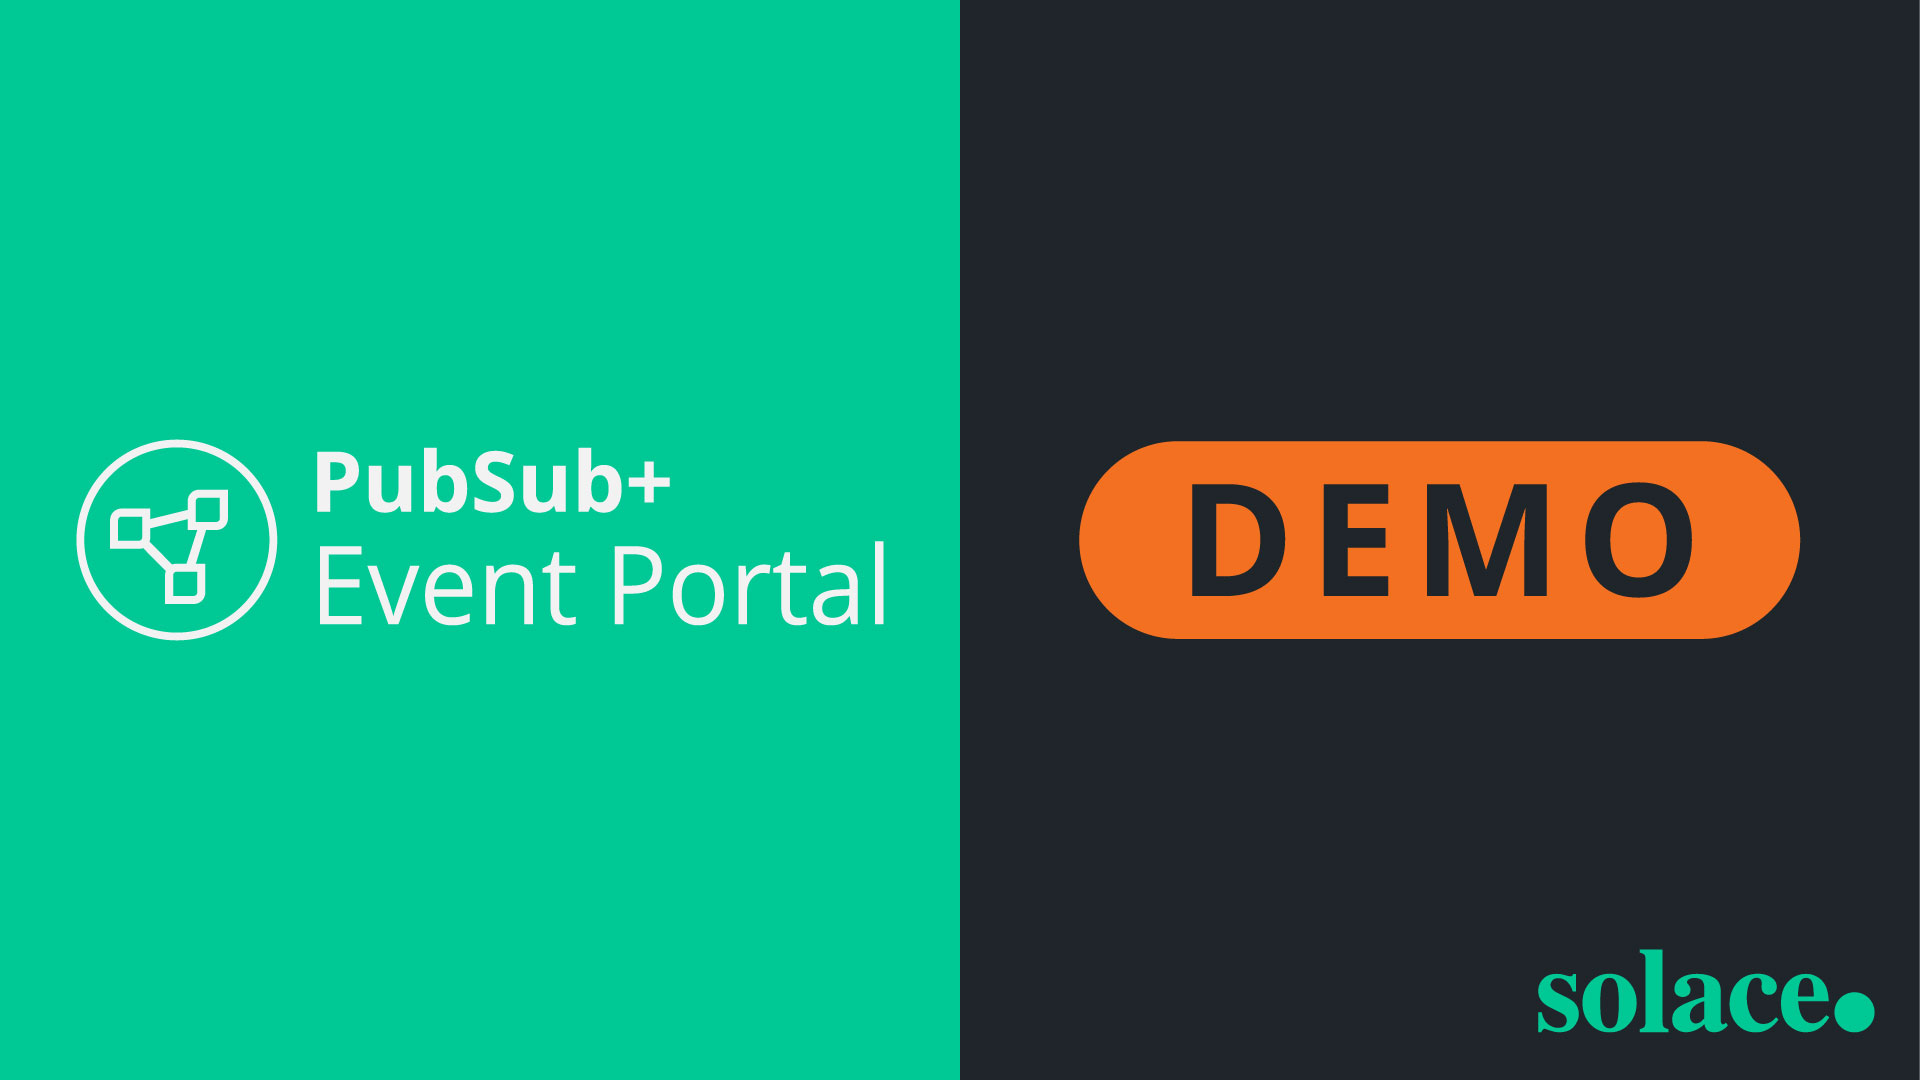 See PubSub+ Event Portal in Action